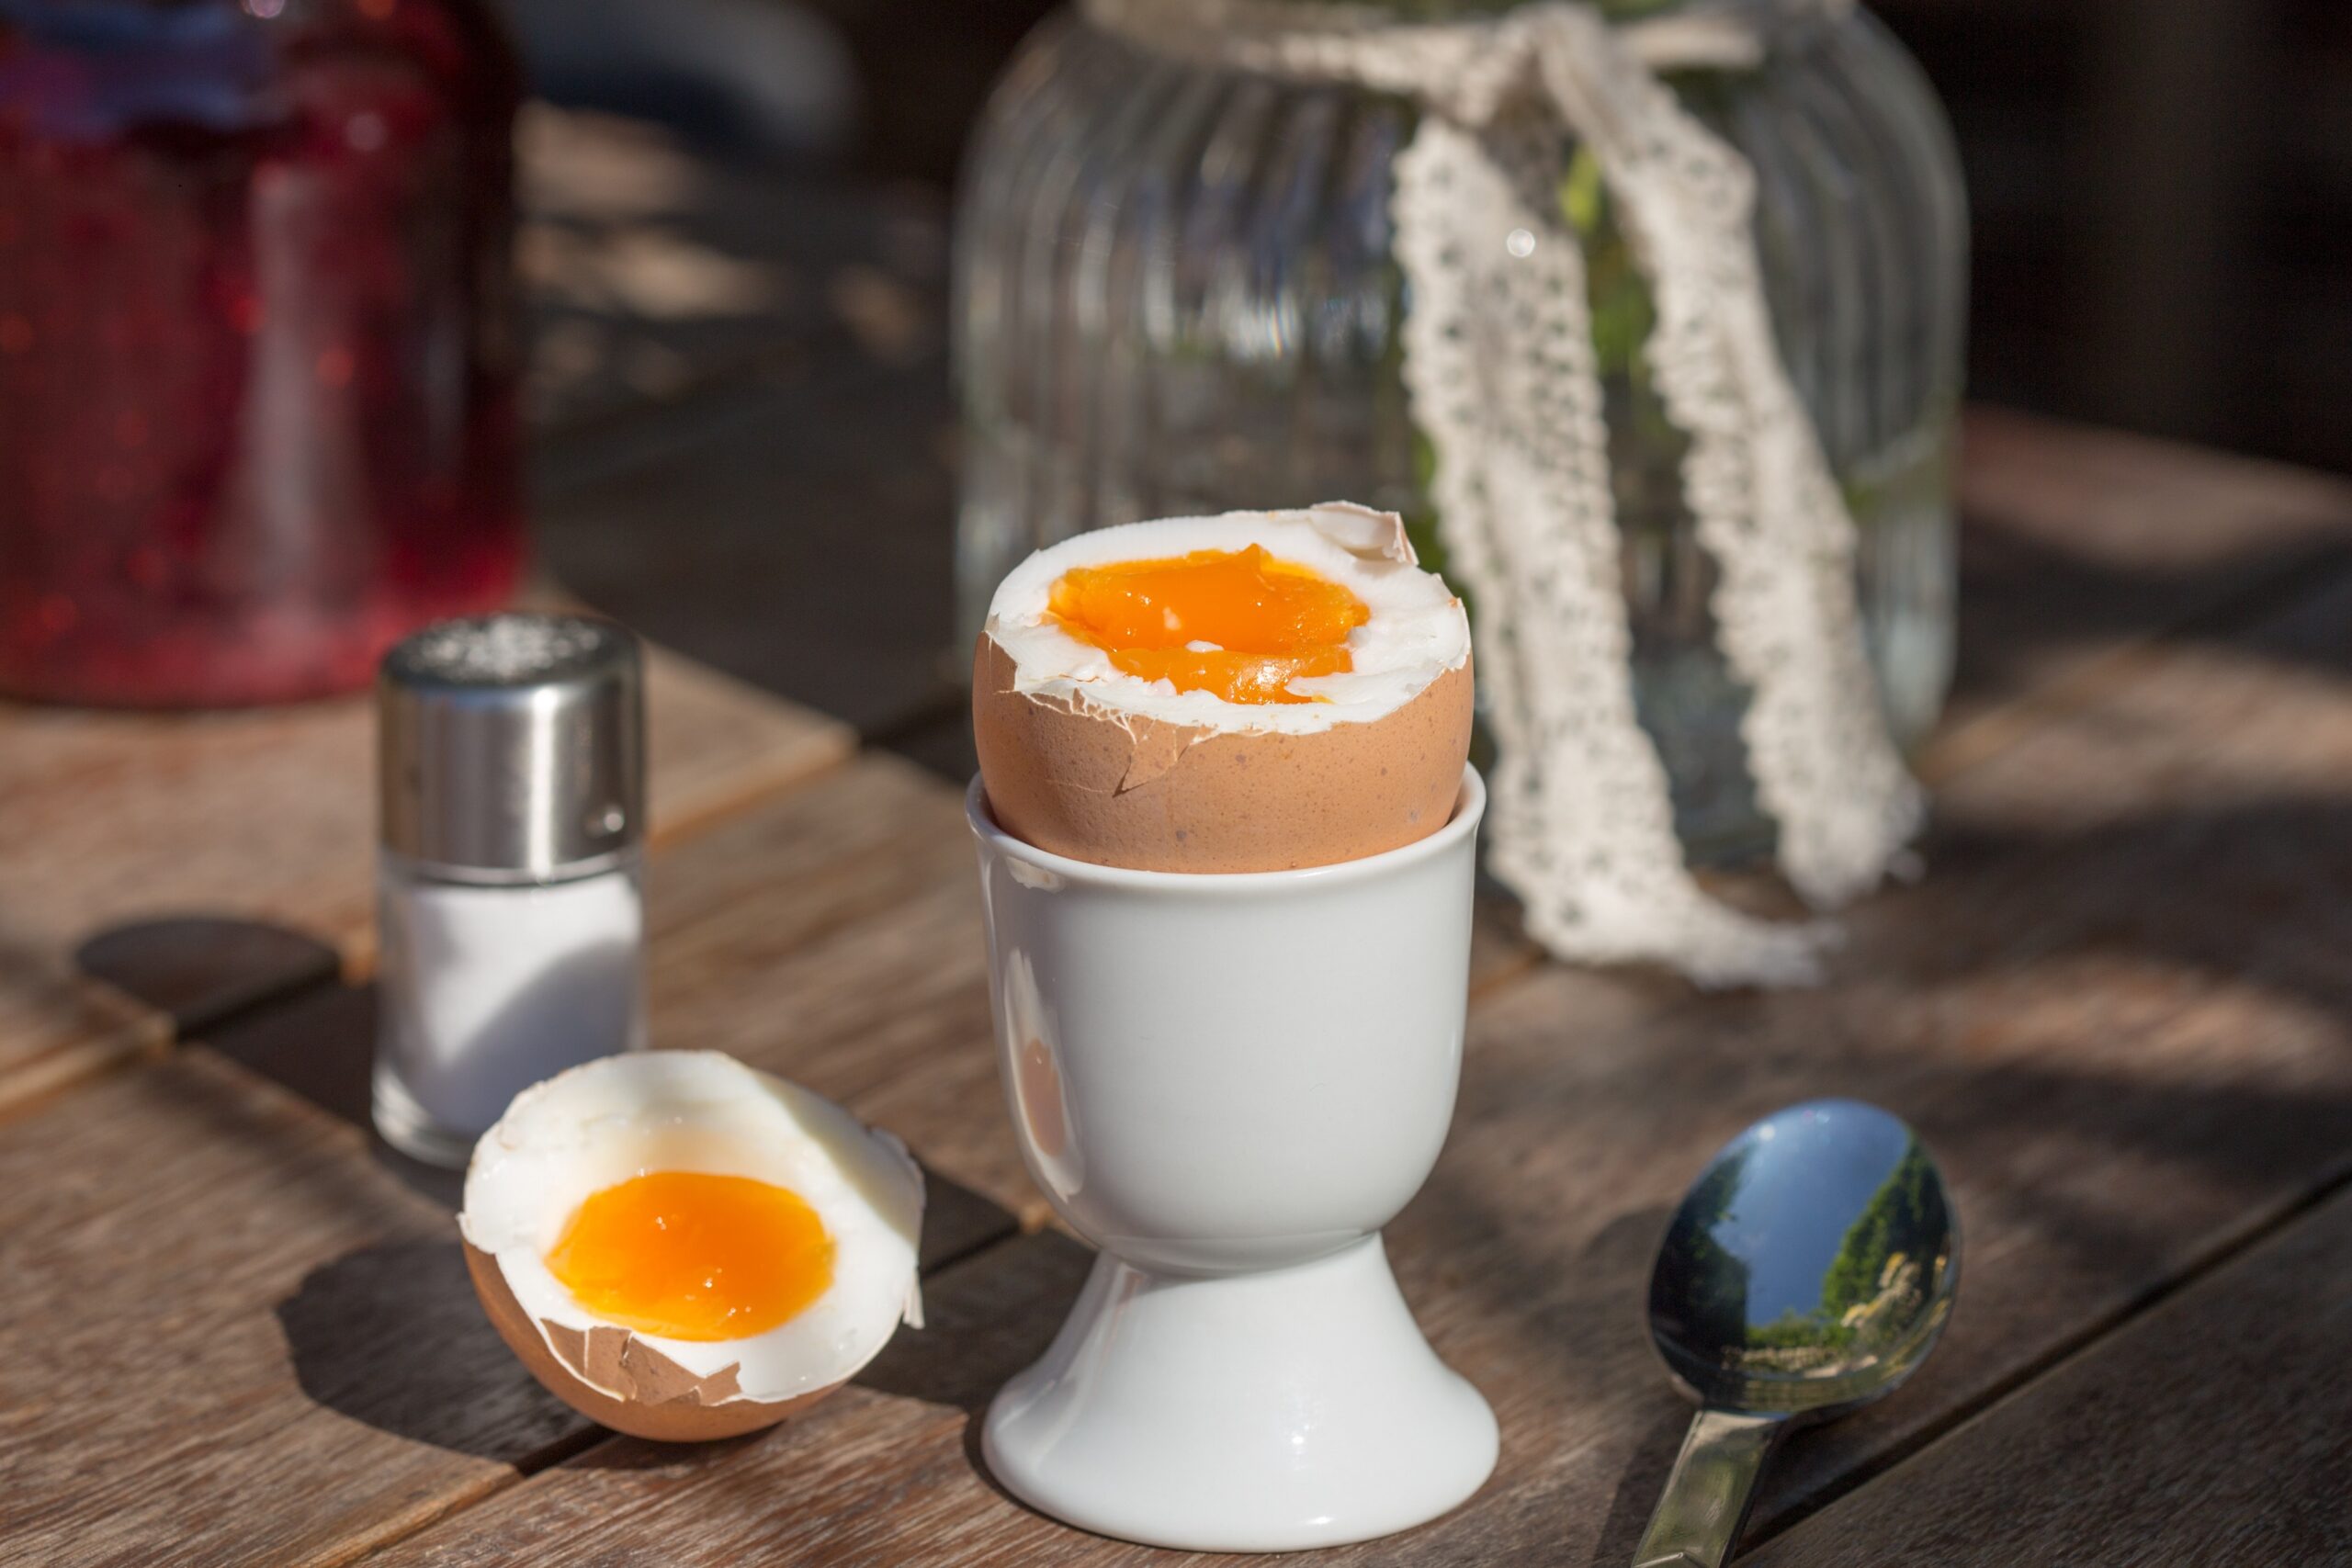 Eggs: How to store and prepare for maximum vitamin D content